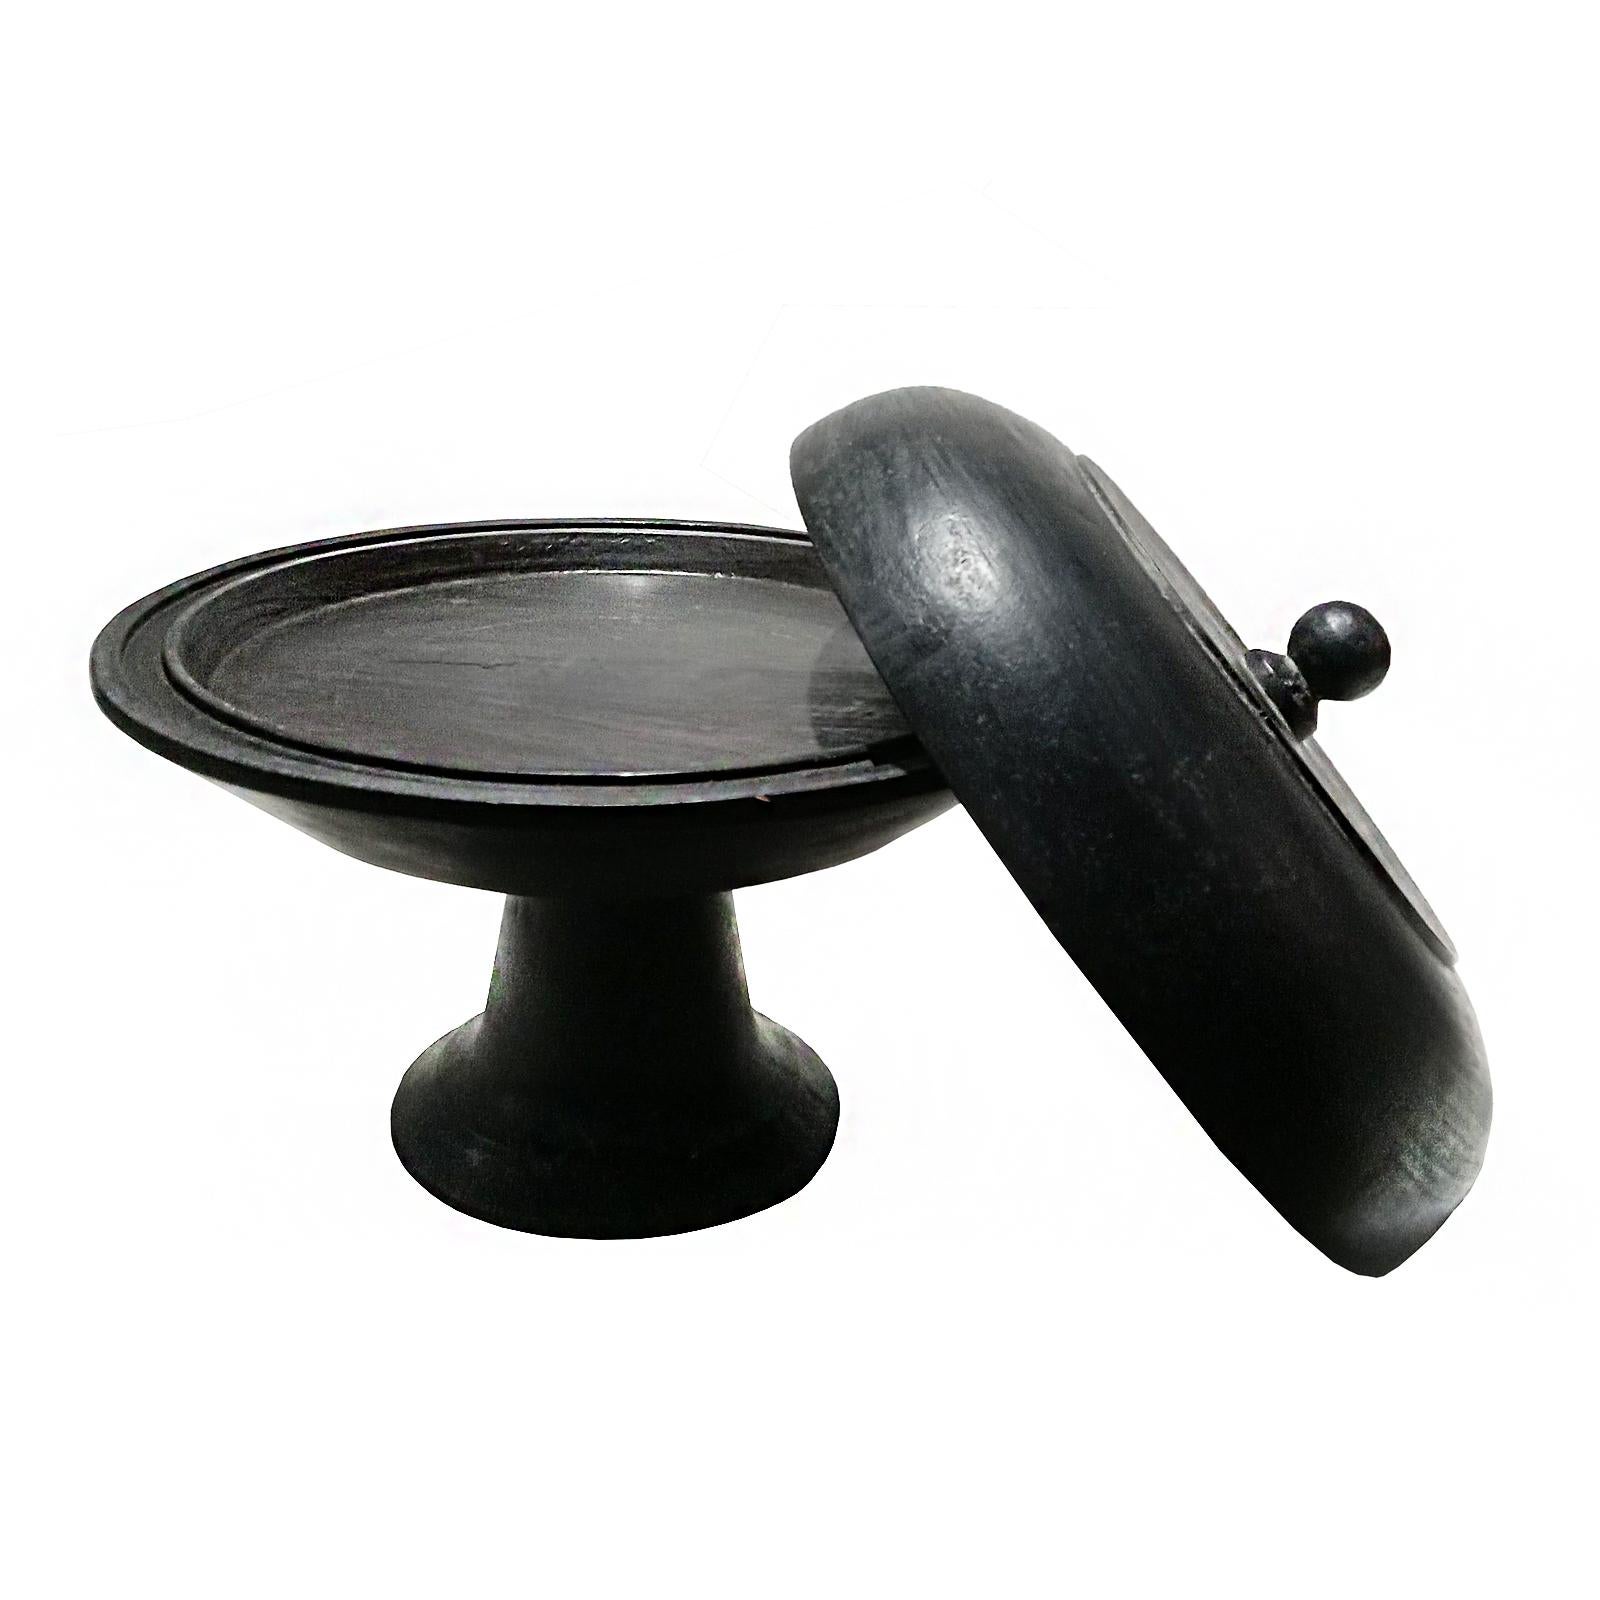 Hand-Carved Covered Pedestal Serving Tray